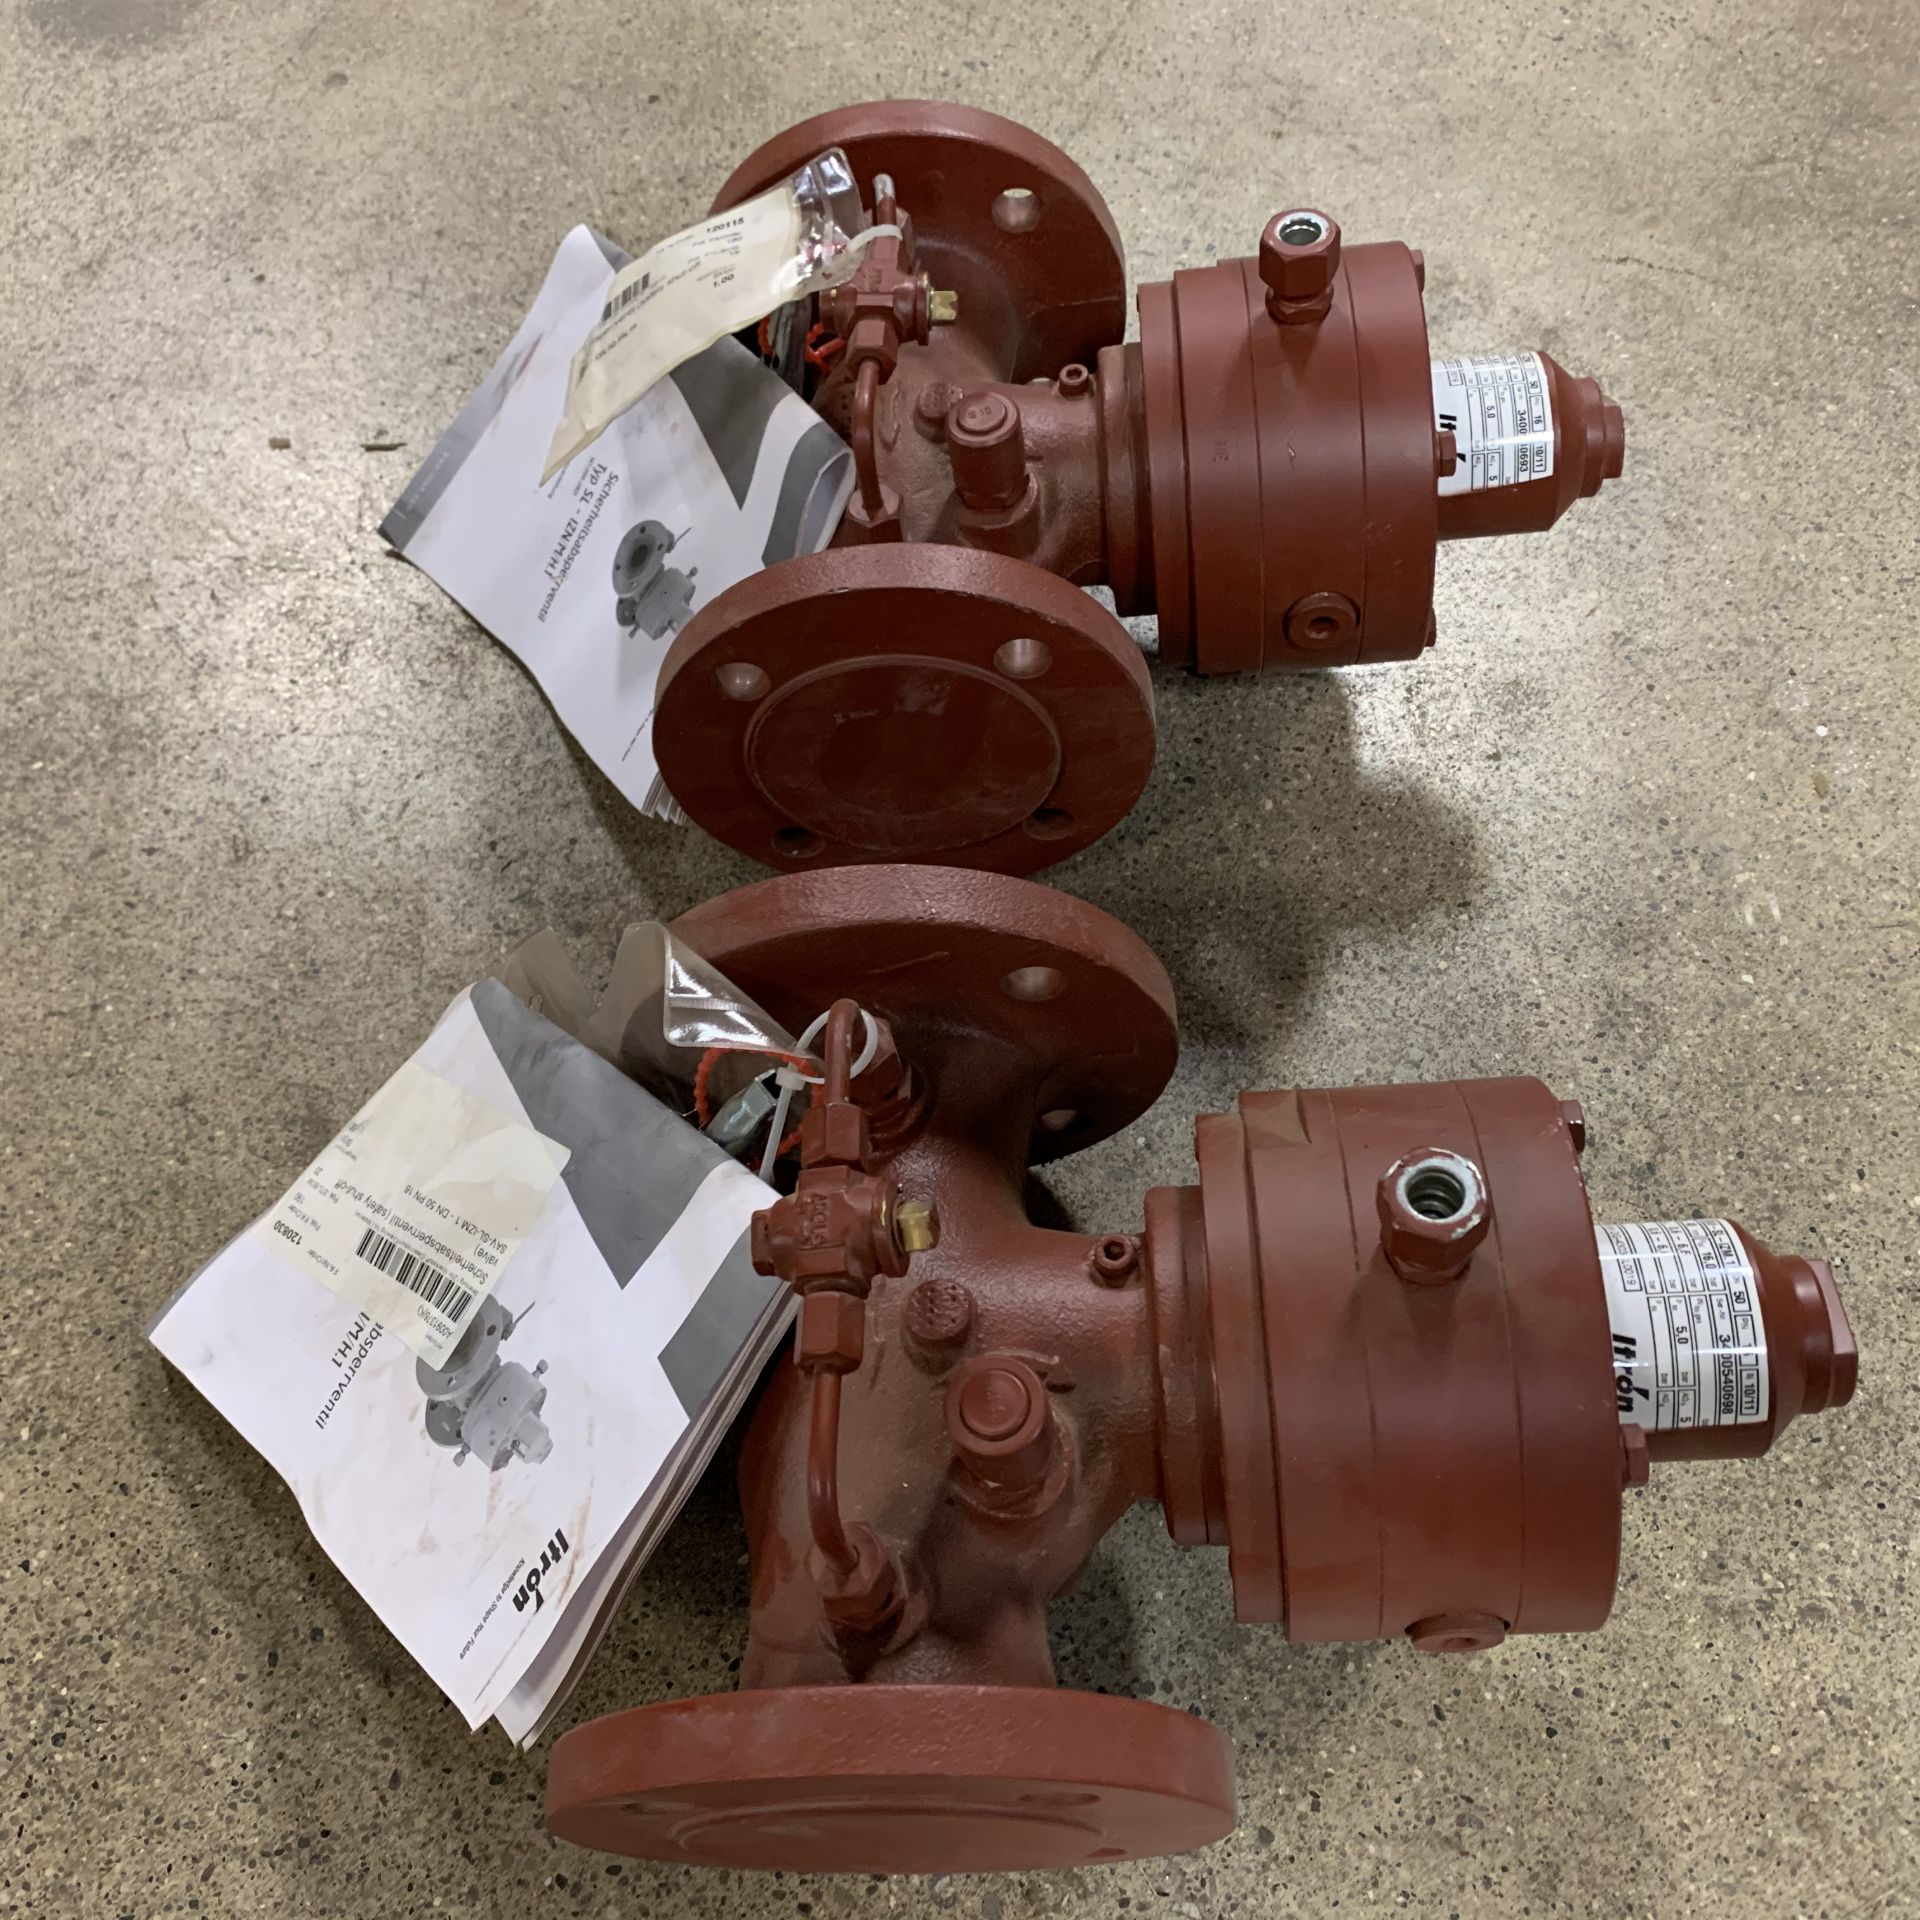 NEW OUT OF BOX - ITRON GAS METERING PUMP DG-4303CL0019 (SAV-SL-IZM.1) - Image 3 of 6